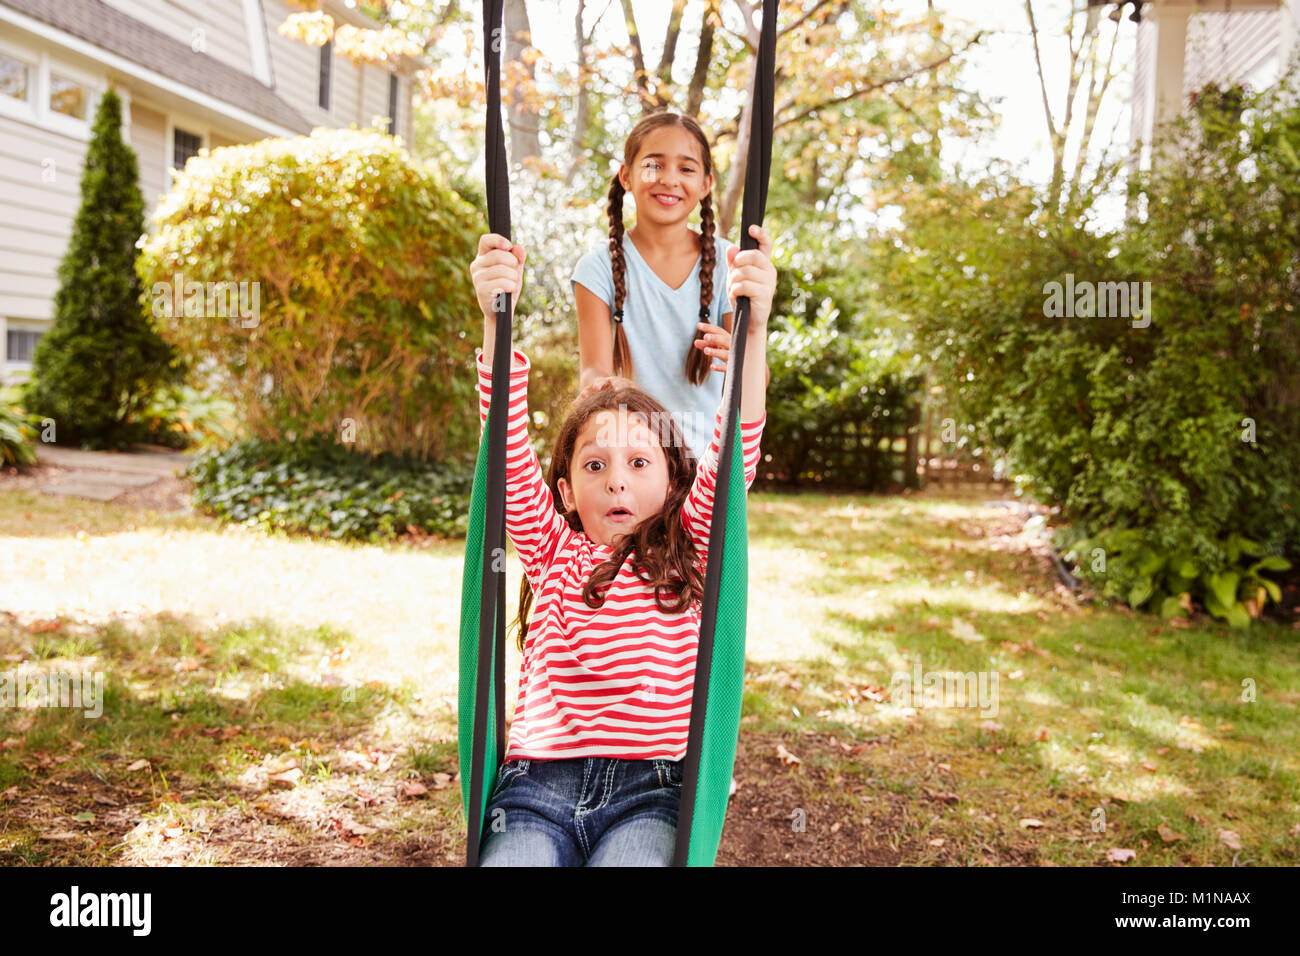 Two Sisters Having Fun On Garden Swing At Home Stock Photo